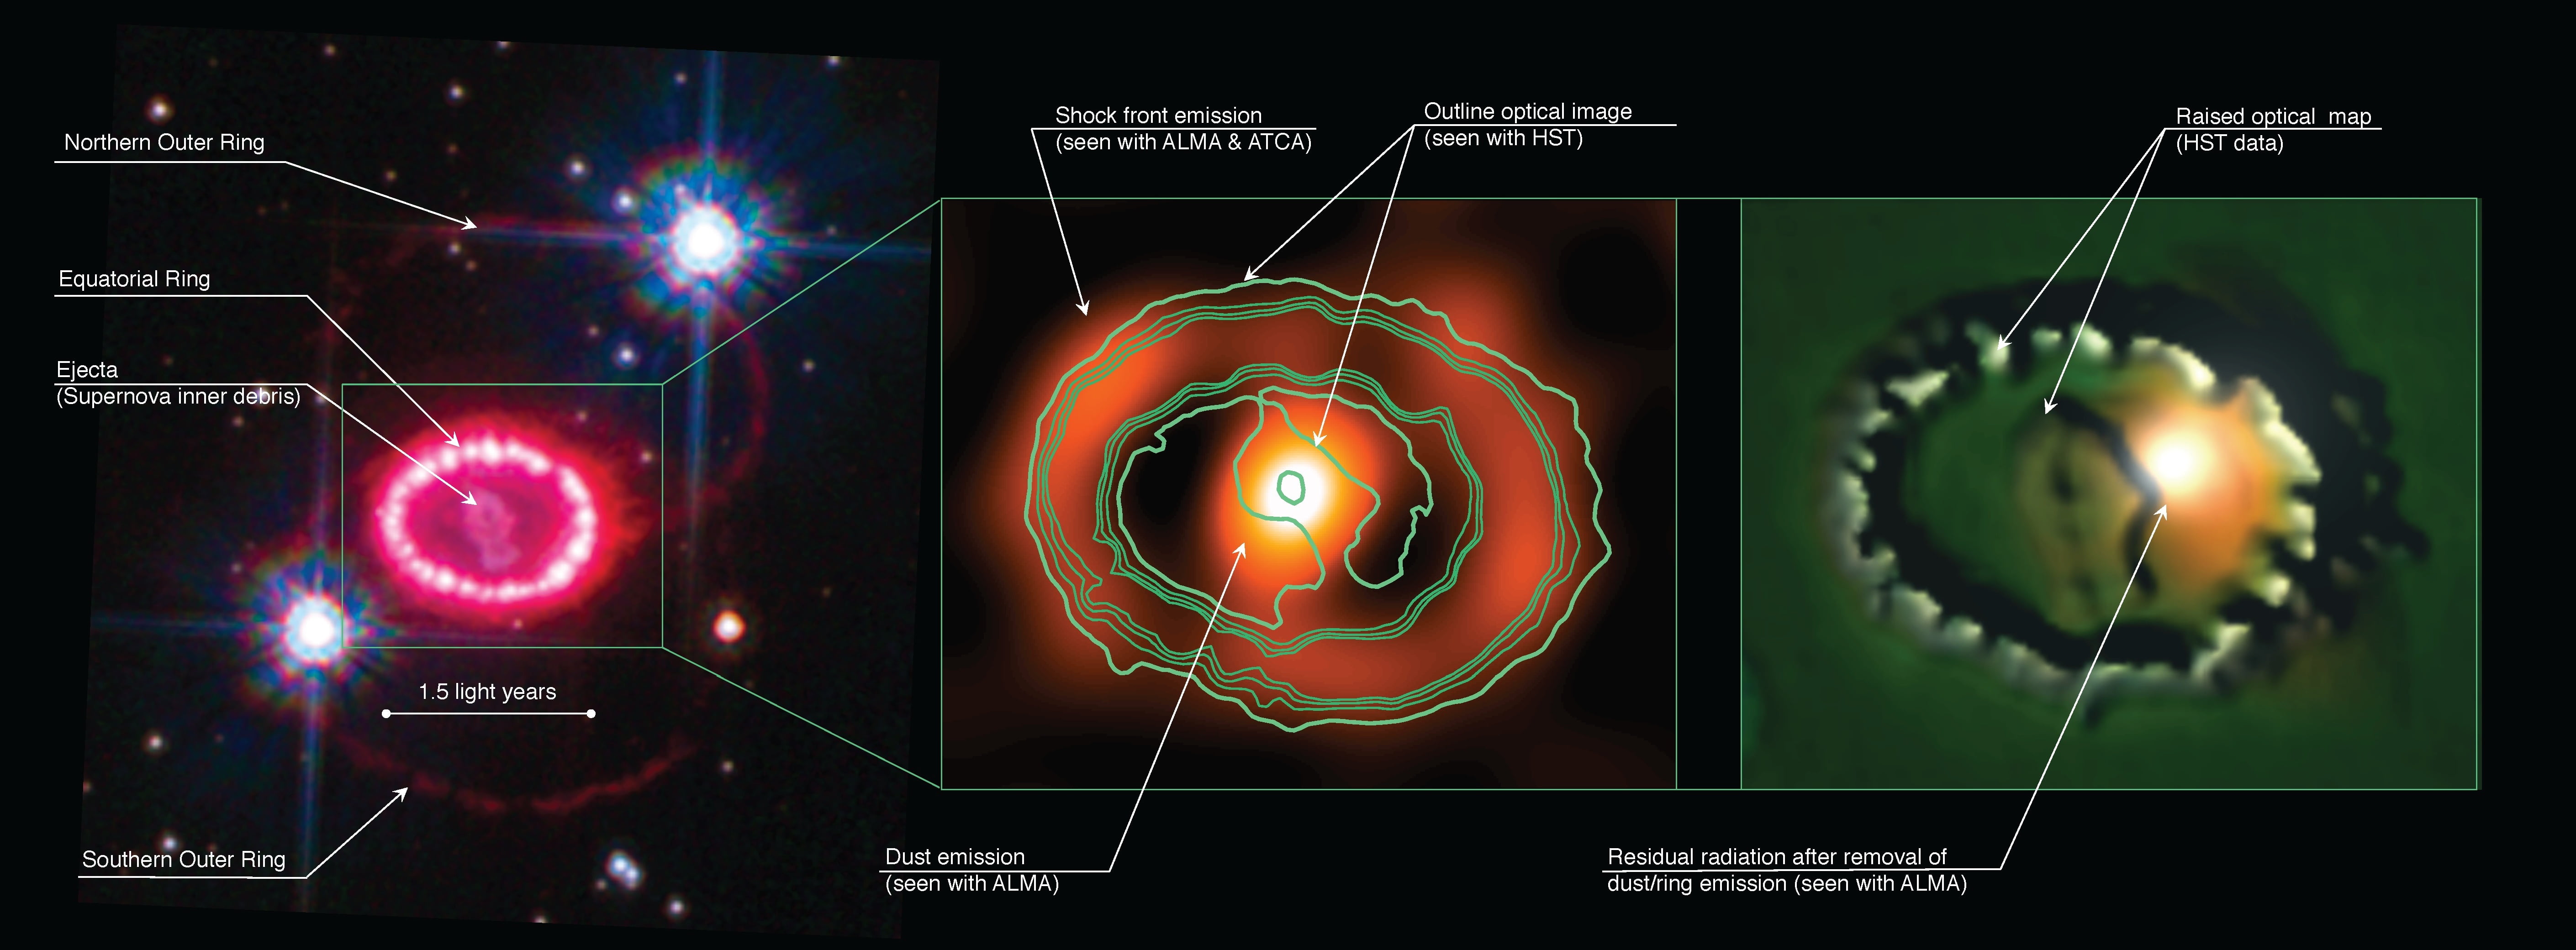 A labeled panel of images showing different views of Supernova Remnant 1987A. Left Panel: SNR1987A as seen by the Hubble Space Telescope in 2010.Middle Panel: SNR1987A as seen by the Australia Telescope Compact Array (ATCA) in New South Wales and the Atacama Large Millimeter/submillimeter Array (ALMA) in Chile. Right Panel: A computer generated visualisation of the remnant showing the possible location of a Pulsar. Credit: ATCA & ALMA Observations & data - G. Zanardo et al. / HST Image: NASA, ESA, K. France (University of Colorado, Boulder), P. Challis and R. Kirshner (Harvard-Smithsonian Center for Astrophysics)